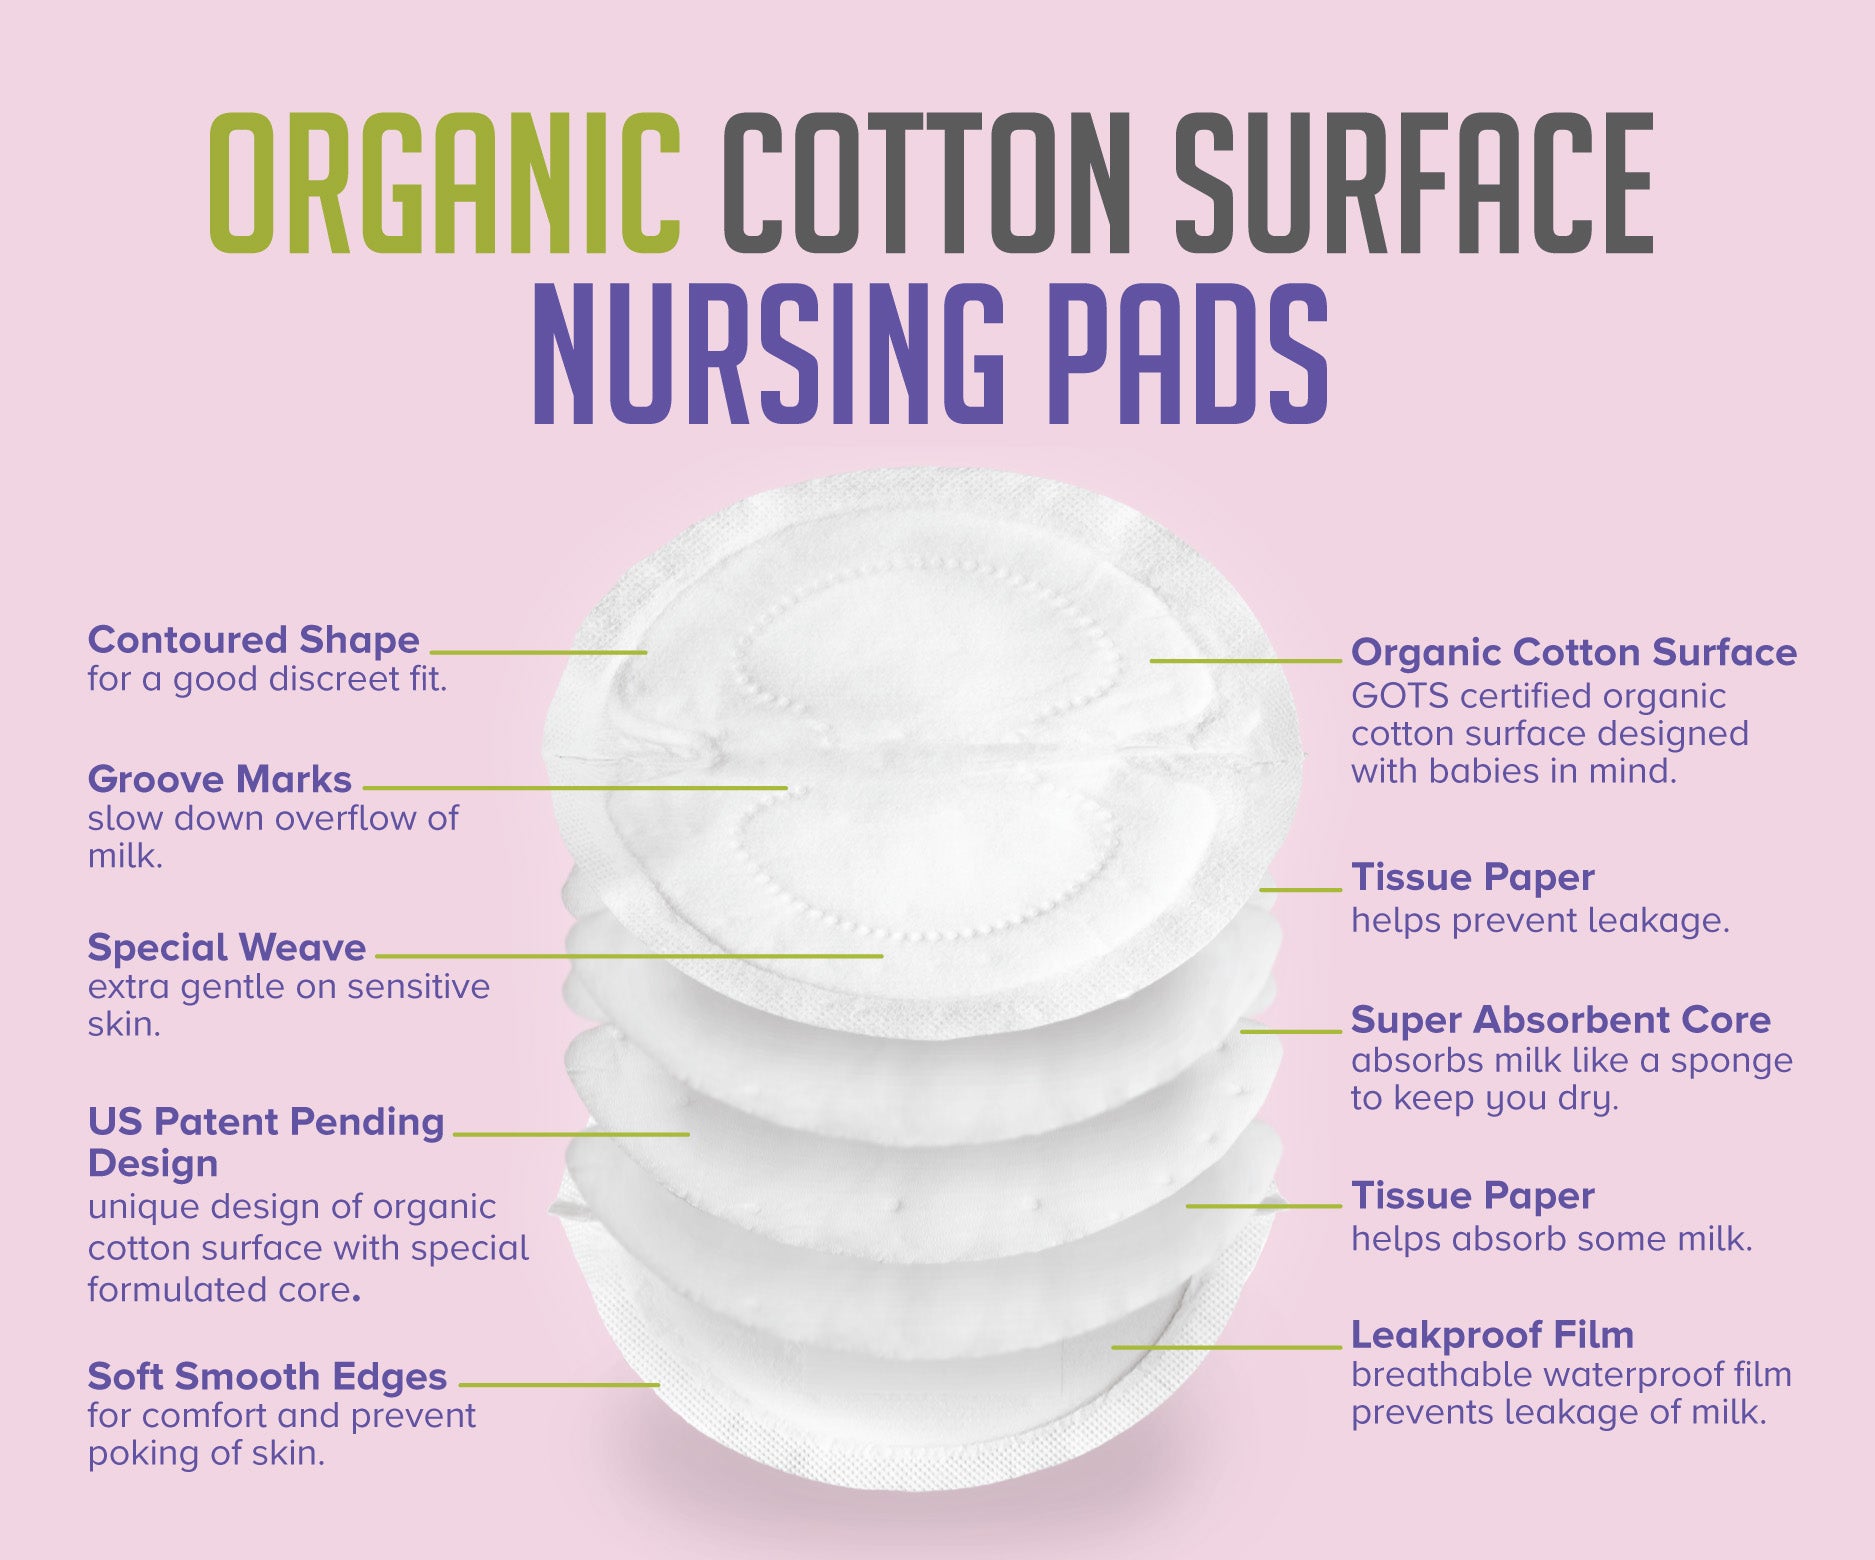 TL Care Nursing Pads Made with Organic Cotton, Natural Color, 6 Count